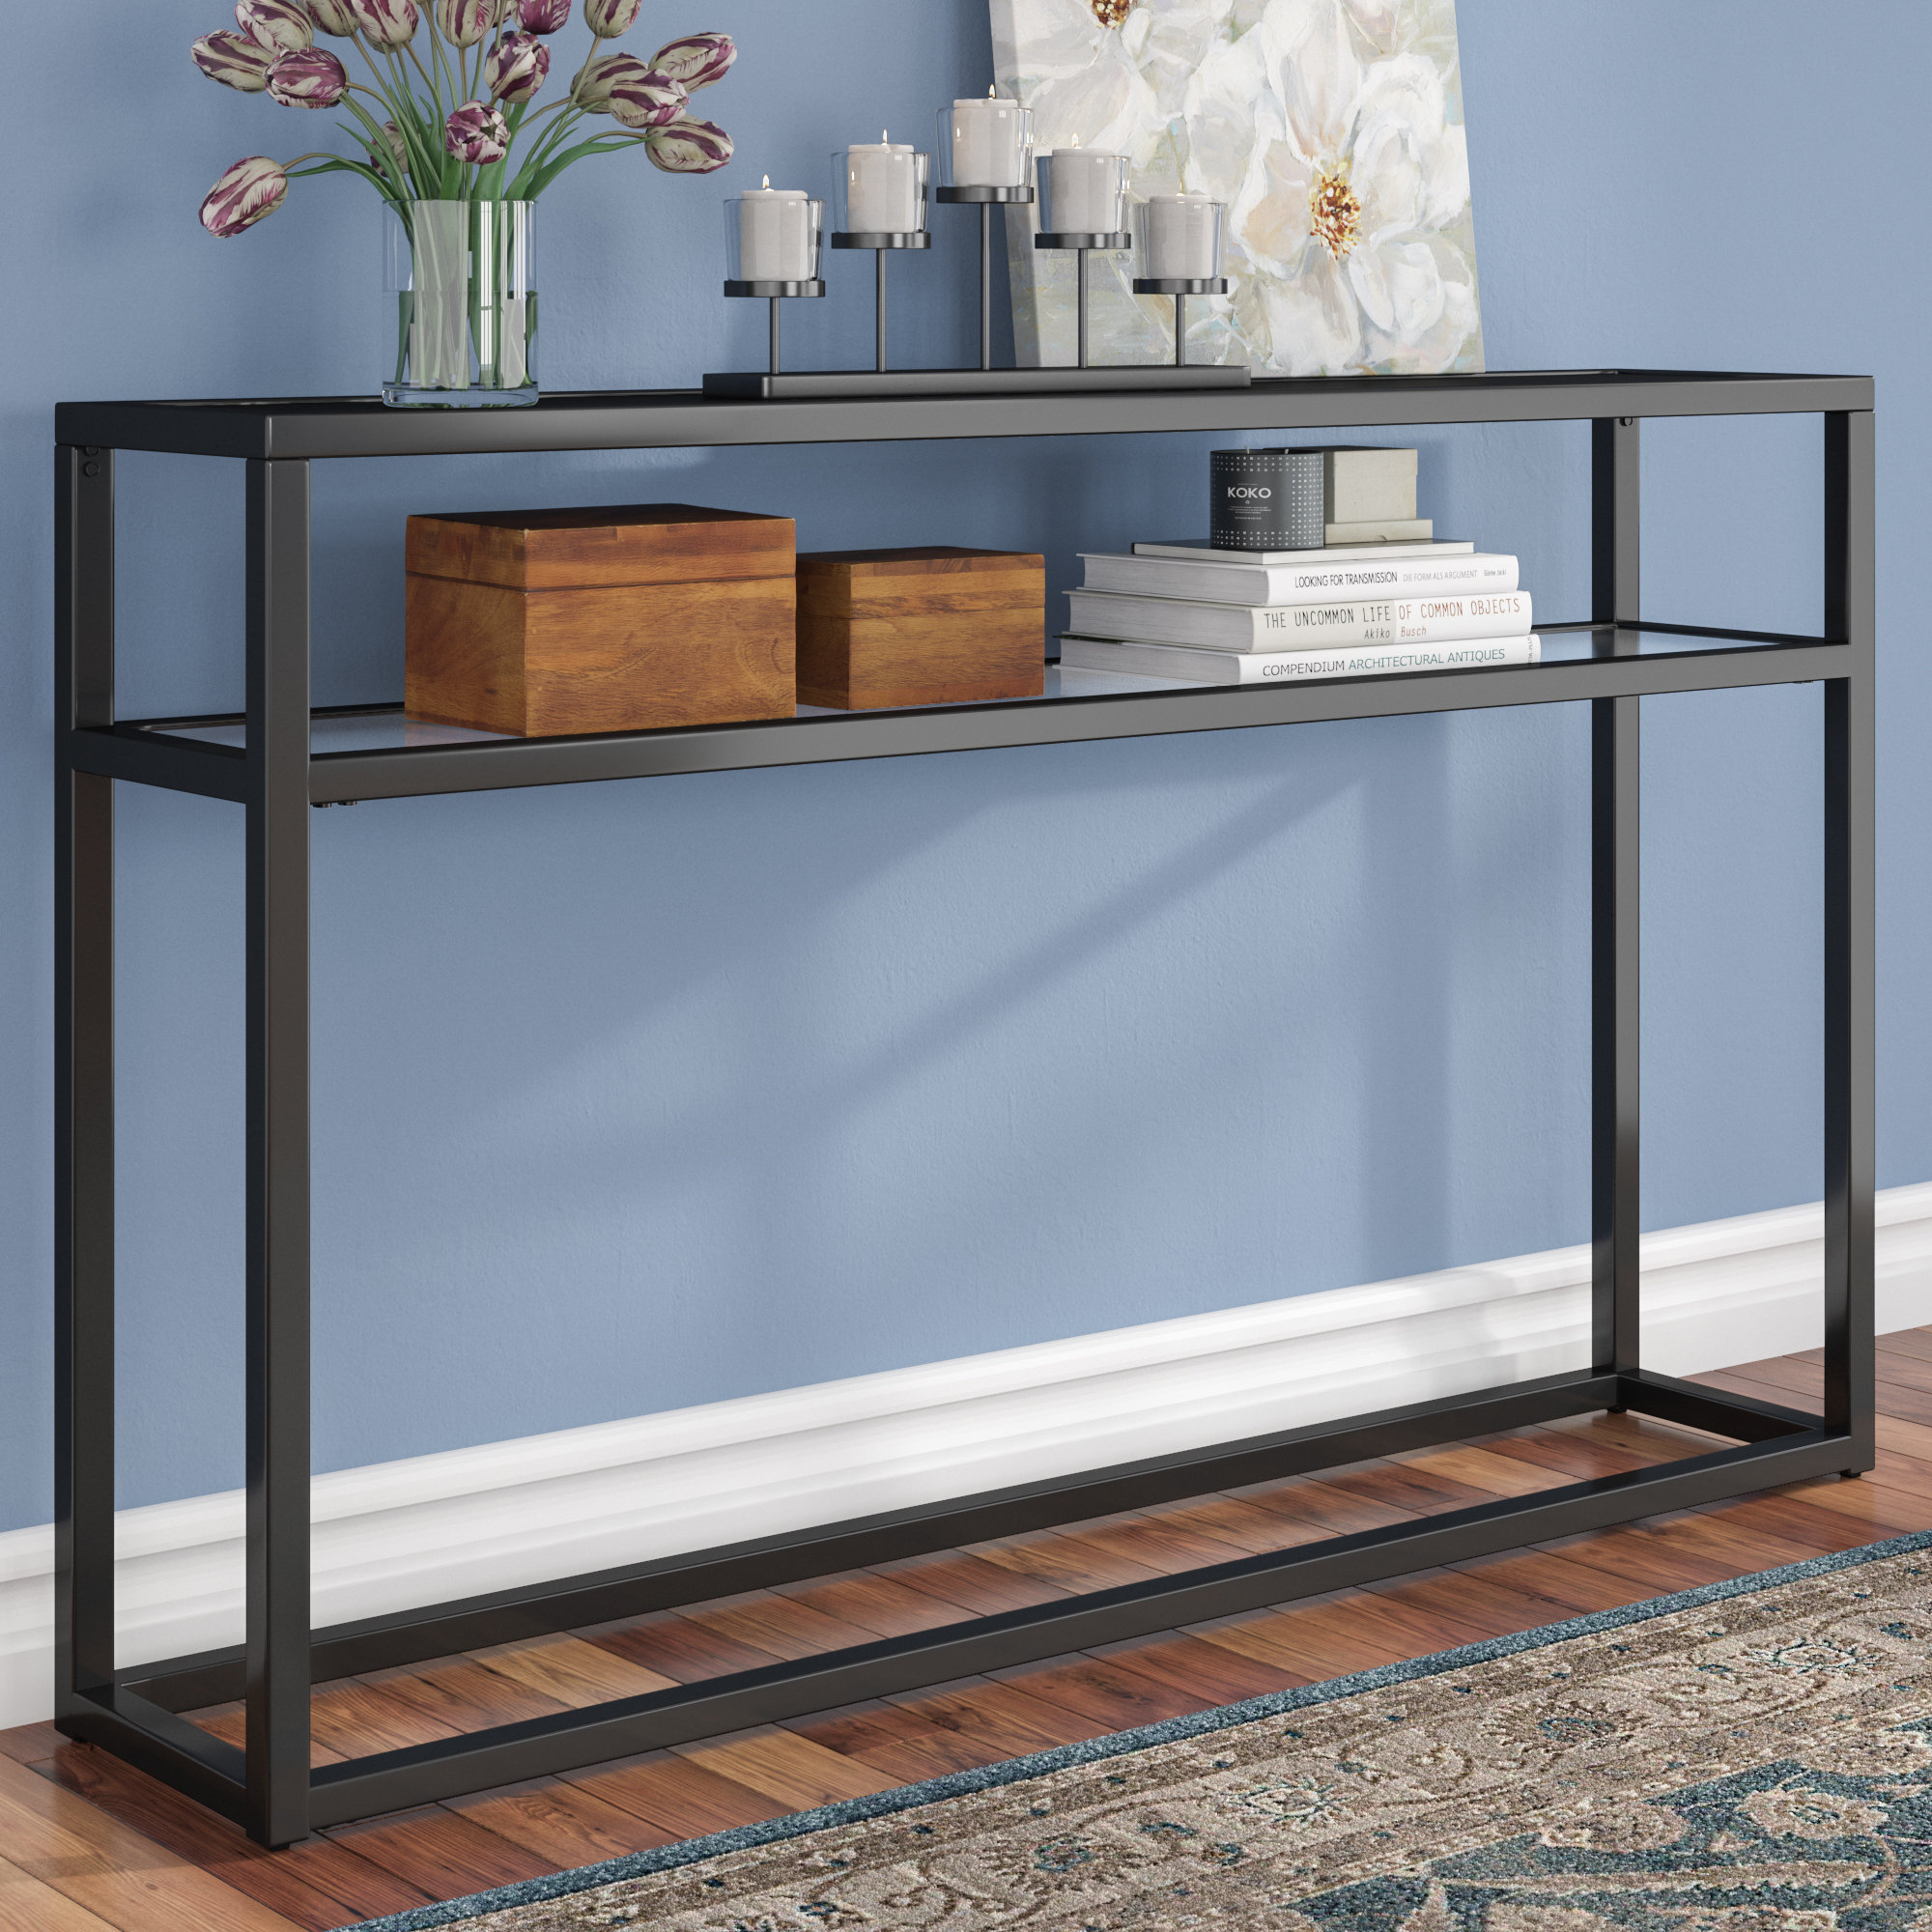 narrow rustic console table swanage long thin accent black and white modern coffee slim wine rack round with screw legs pier one imports coupons sofa bench ikea fabric tablecloths